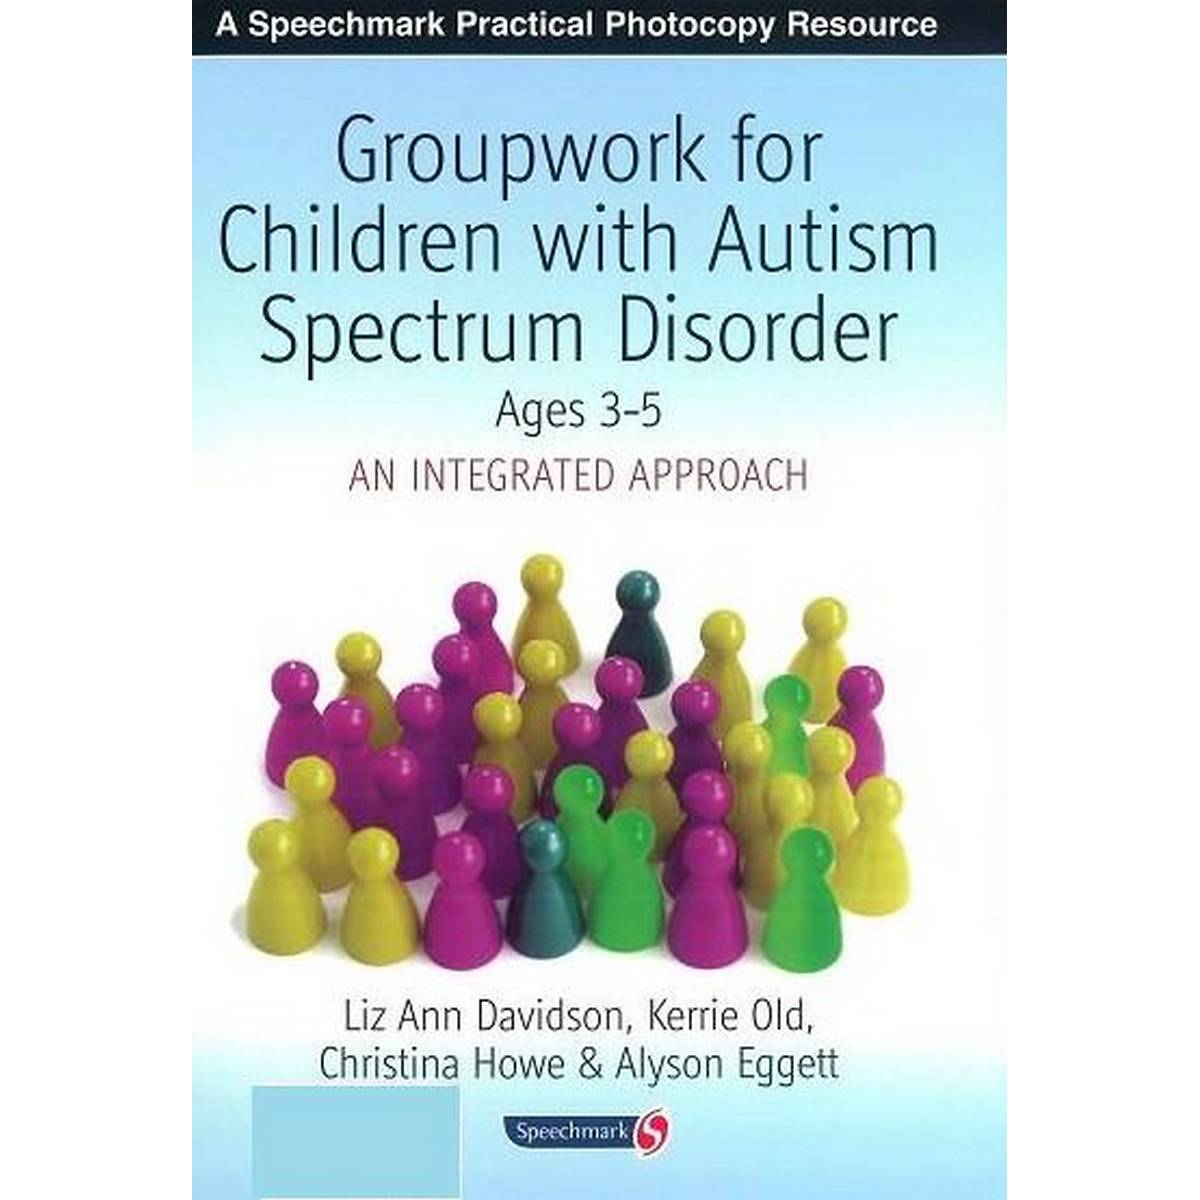 Groupwork for Children with Autism Spectrum Disorder (3-5)